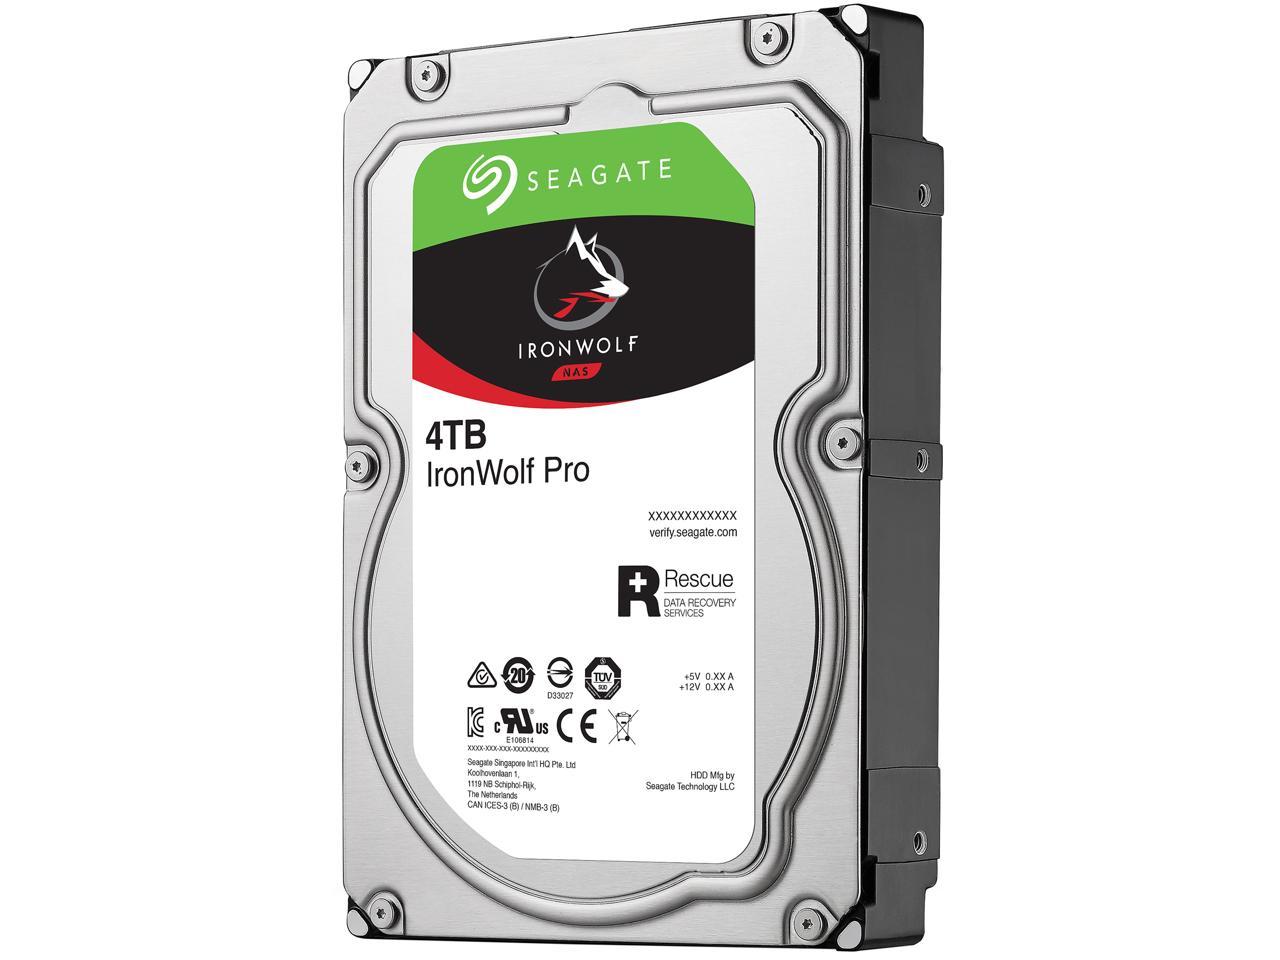 average seagate power on time